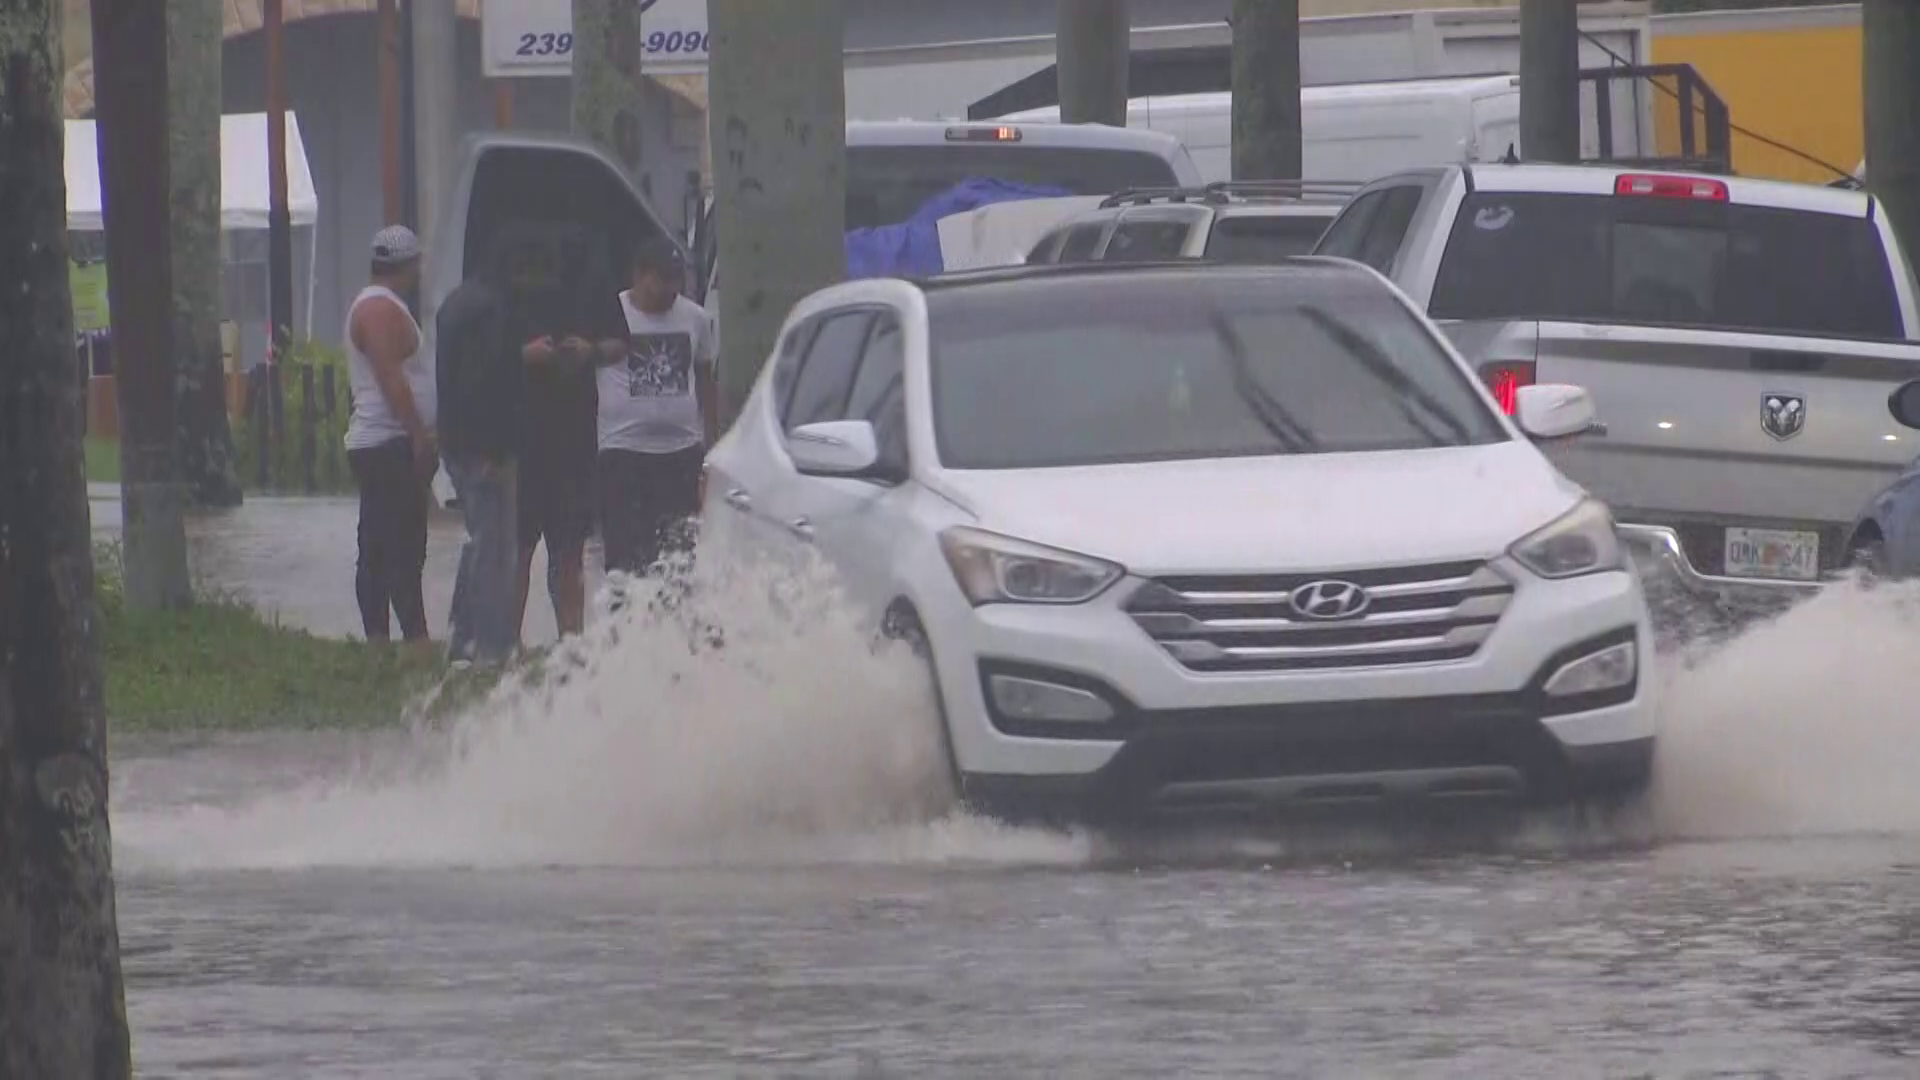 Fort Myers Police advise to avoid flooded roads as heavy rain looms